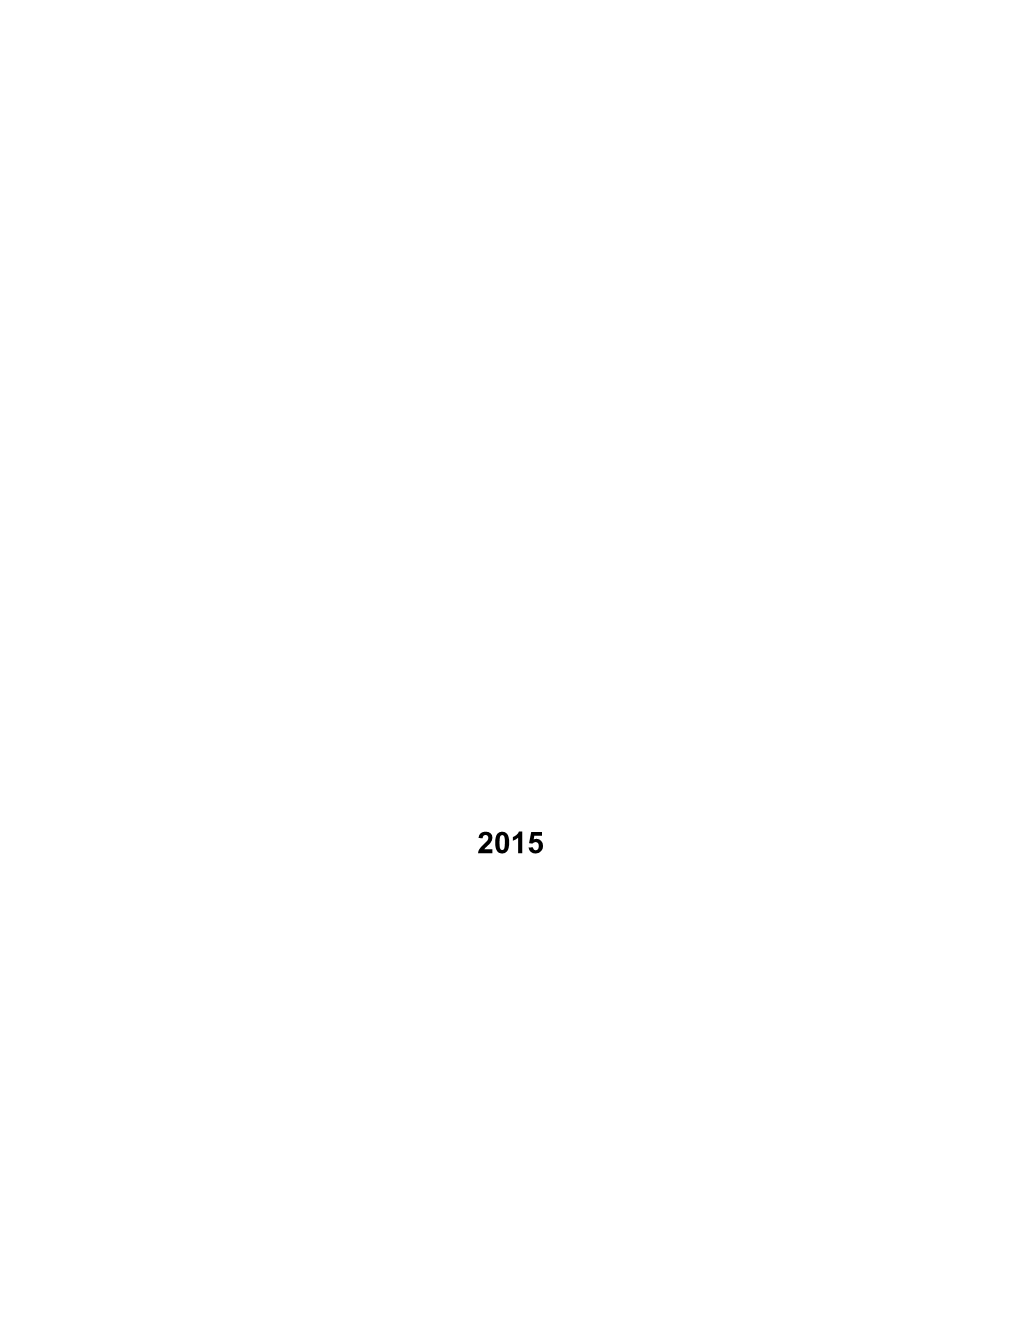 Yearbook-2015-Front.Pdf